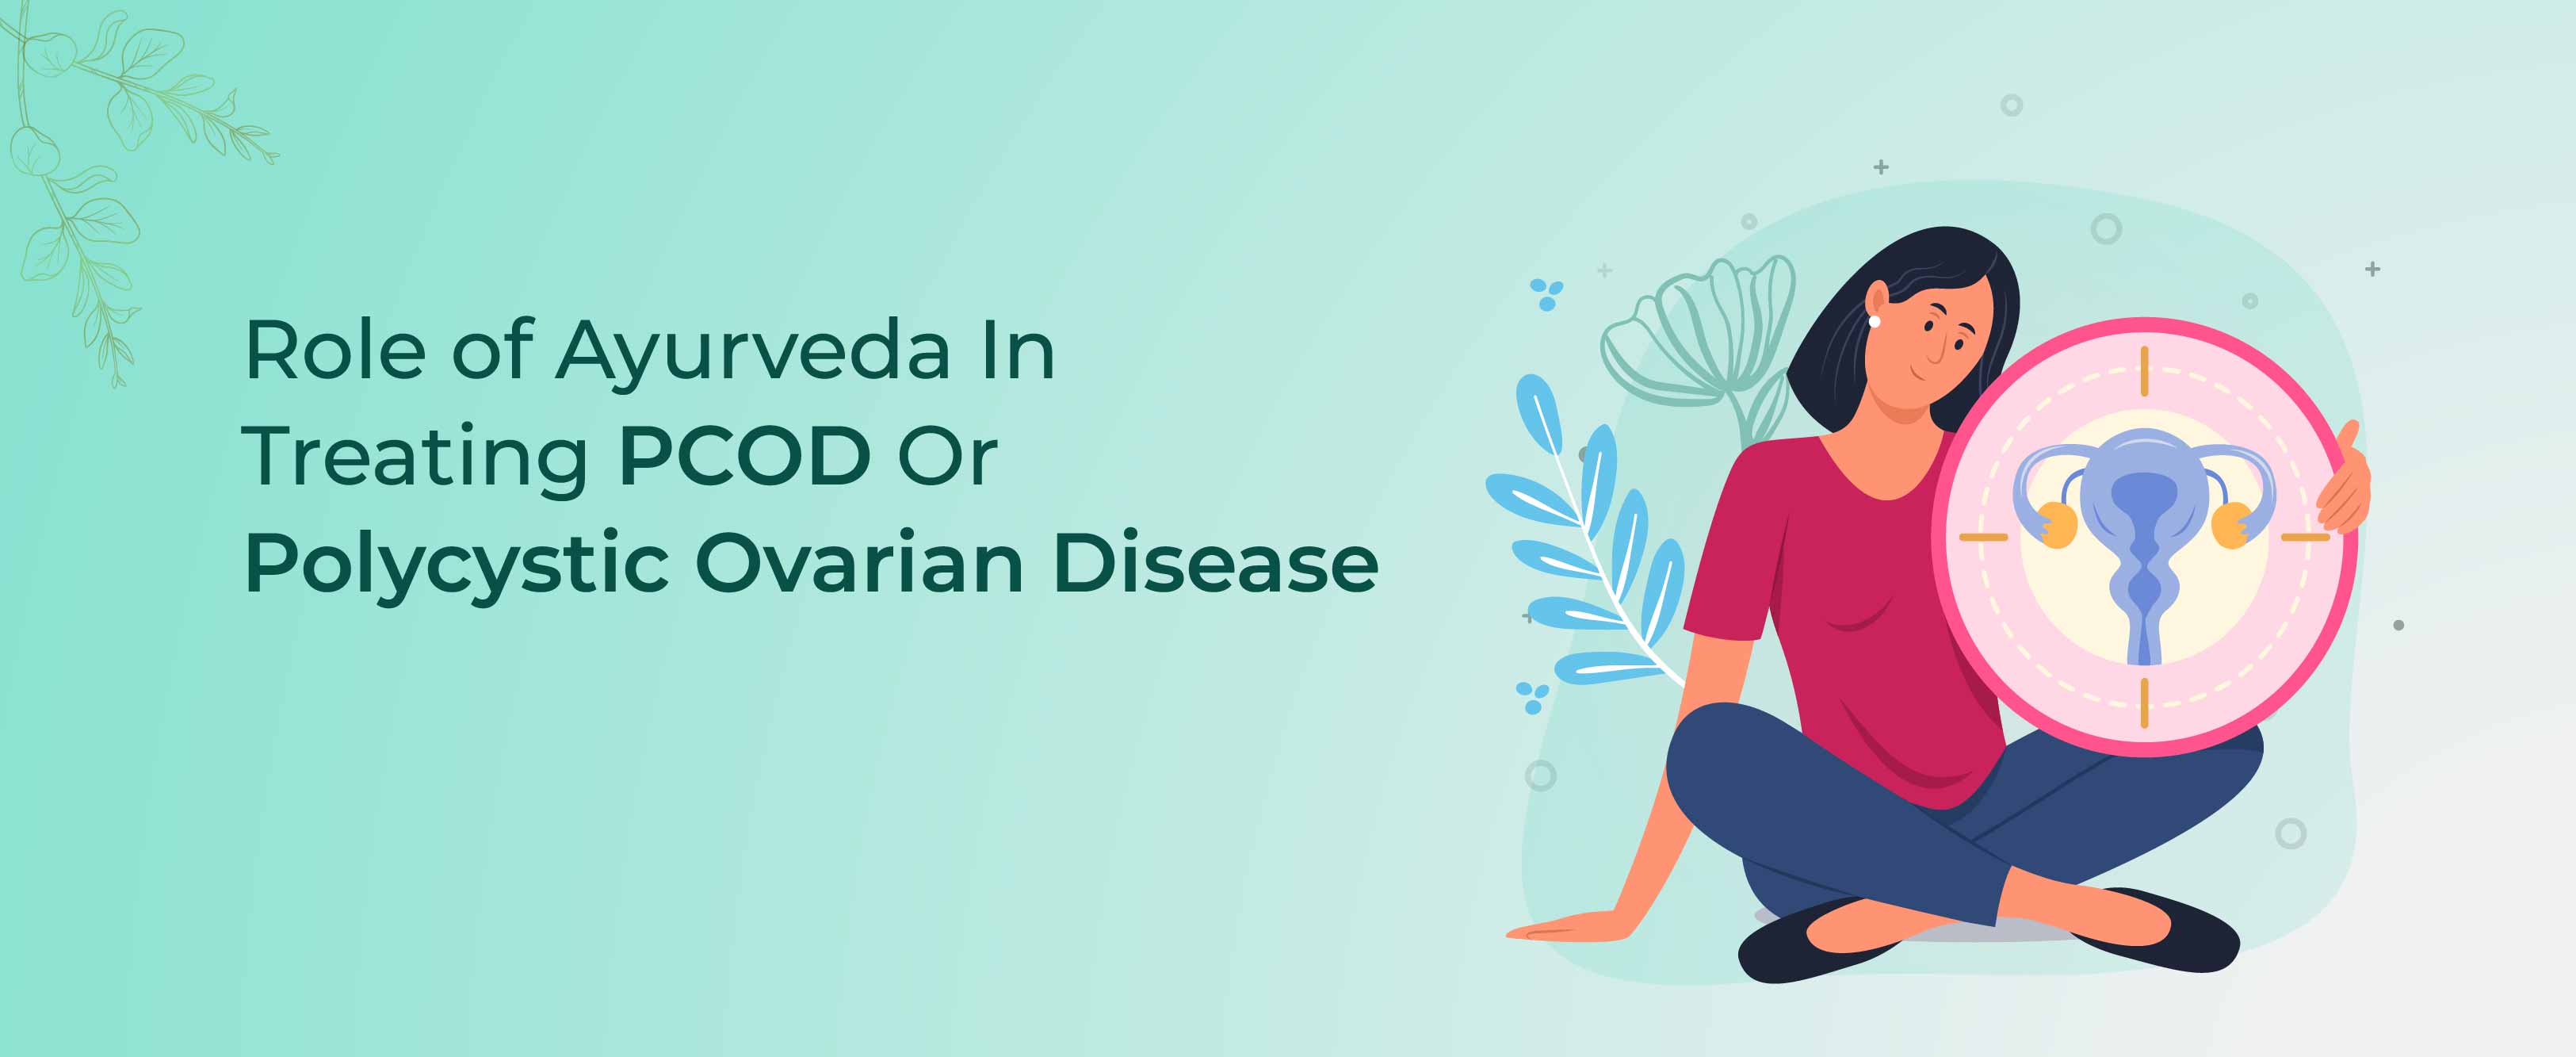 Role_of_Ayurveda_In_Treating_PCOD_Or_Polycystic_Ovarian_Disease_banner_image.jpg